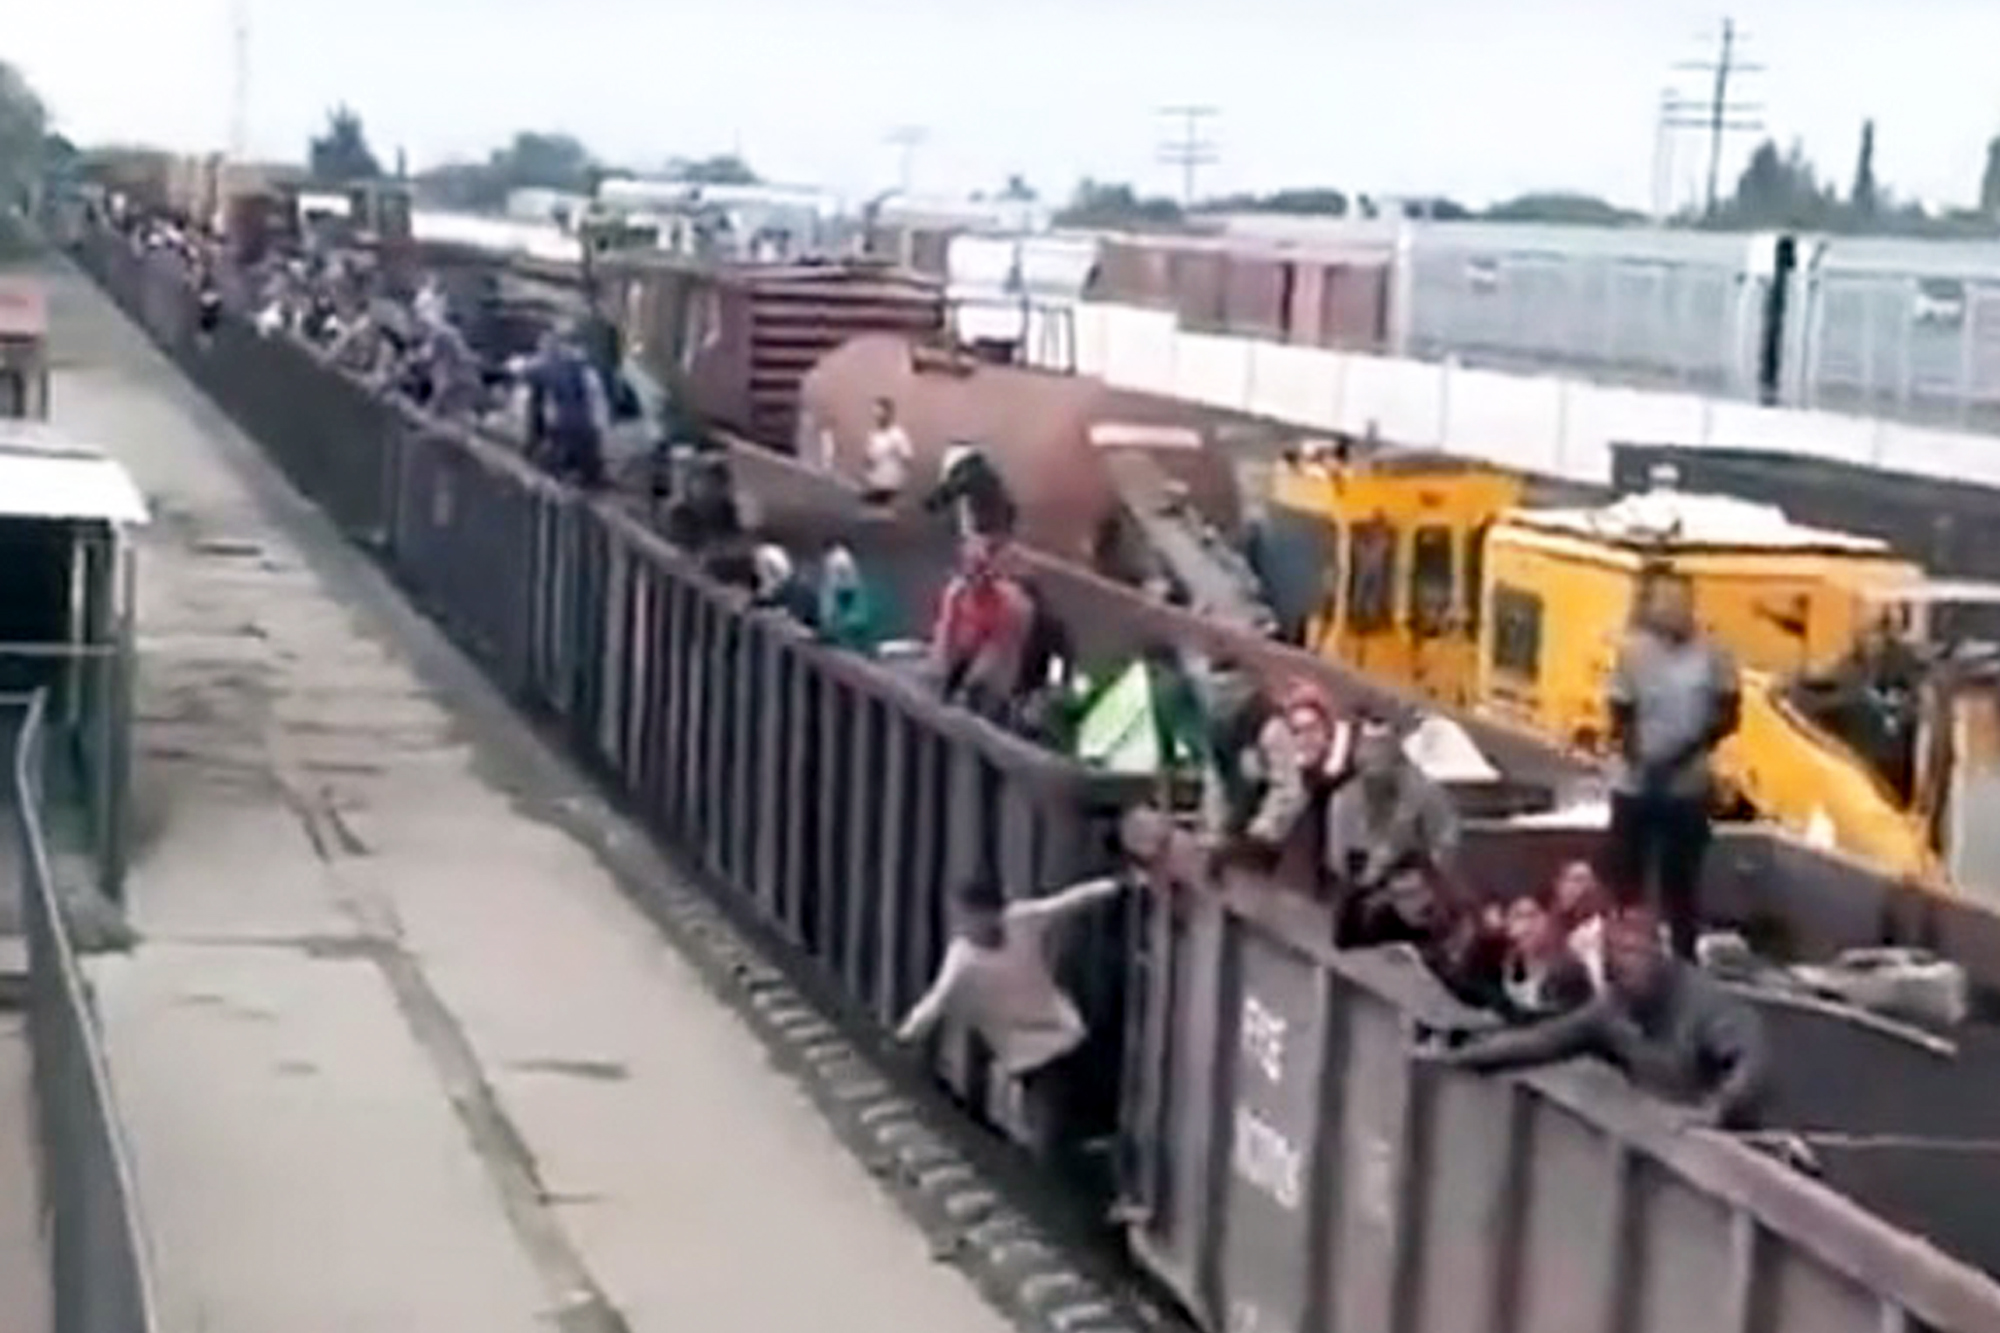 Footage shows migrants cheering as they crowd a train from Mexico headed to the US